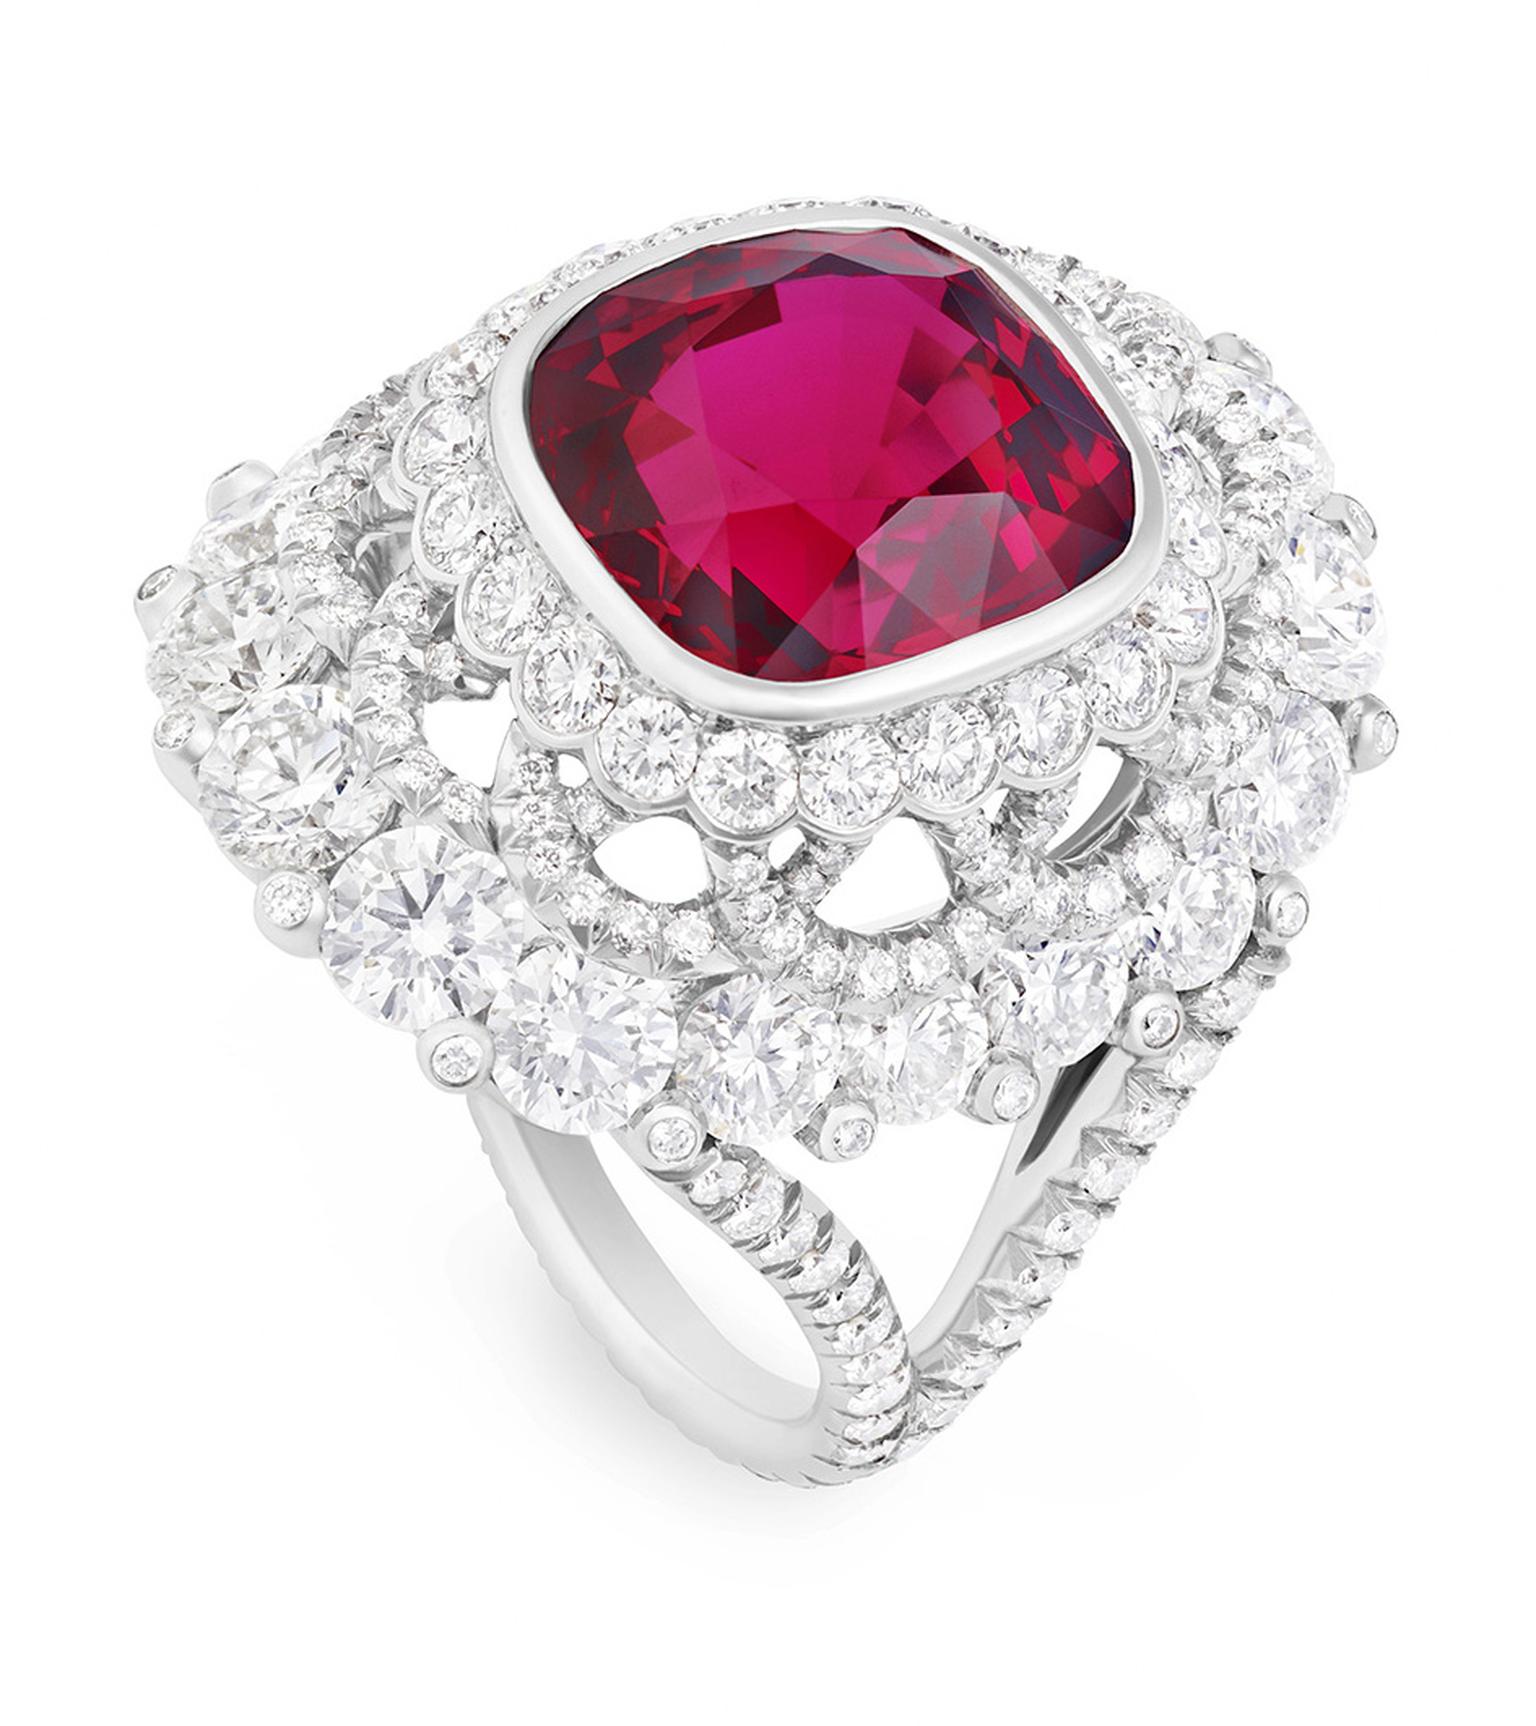 Faberge-Spinel-Ring